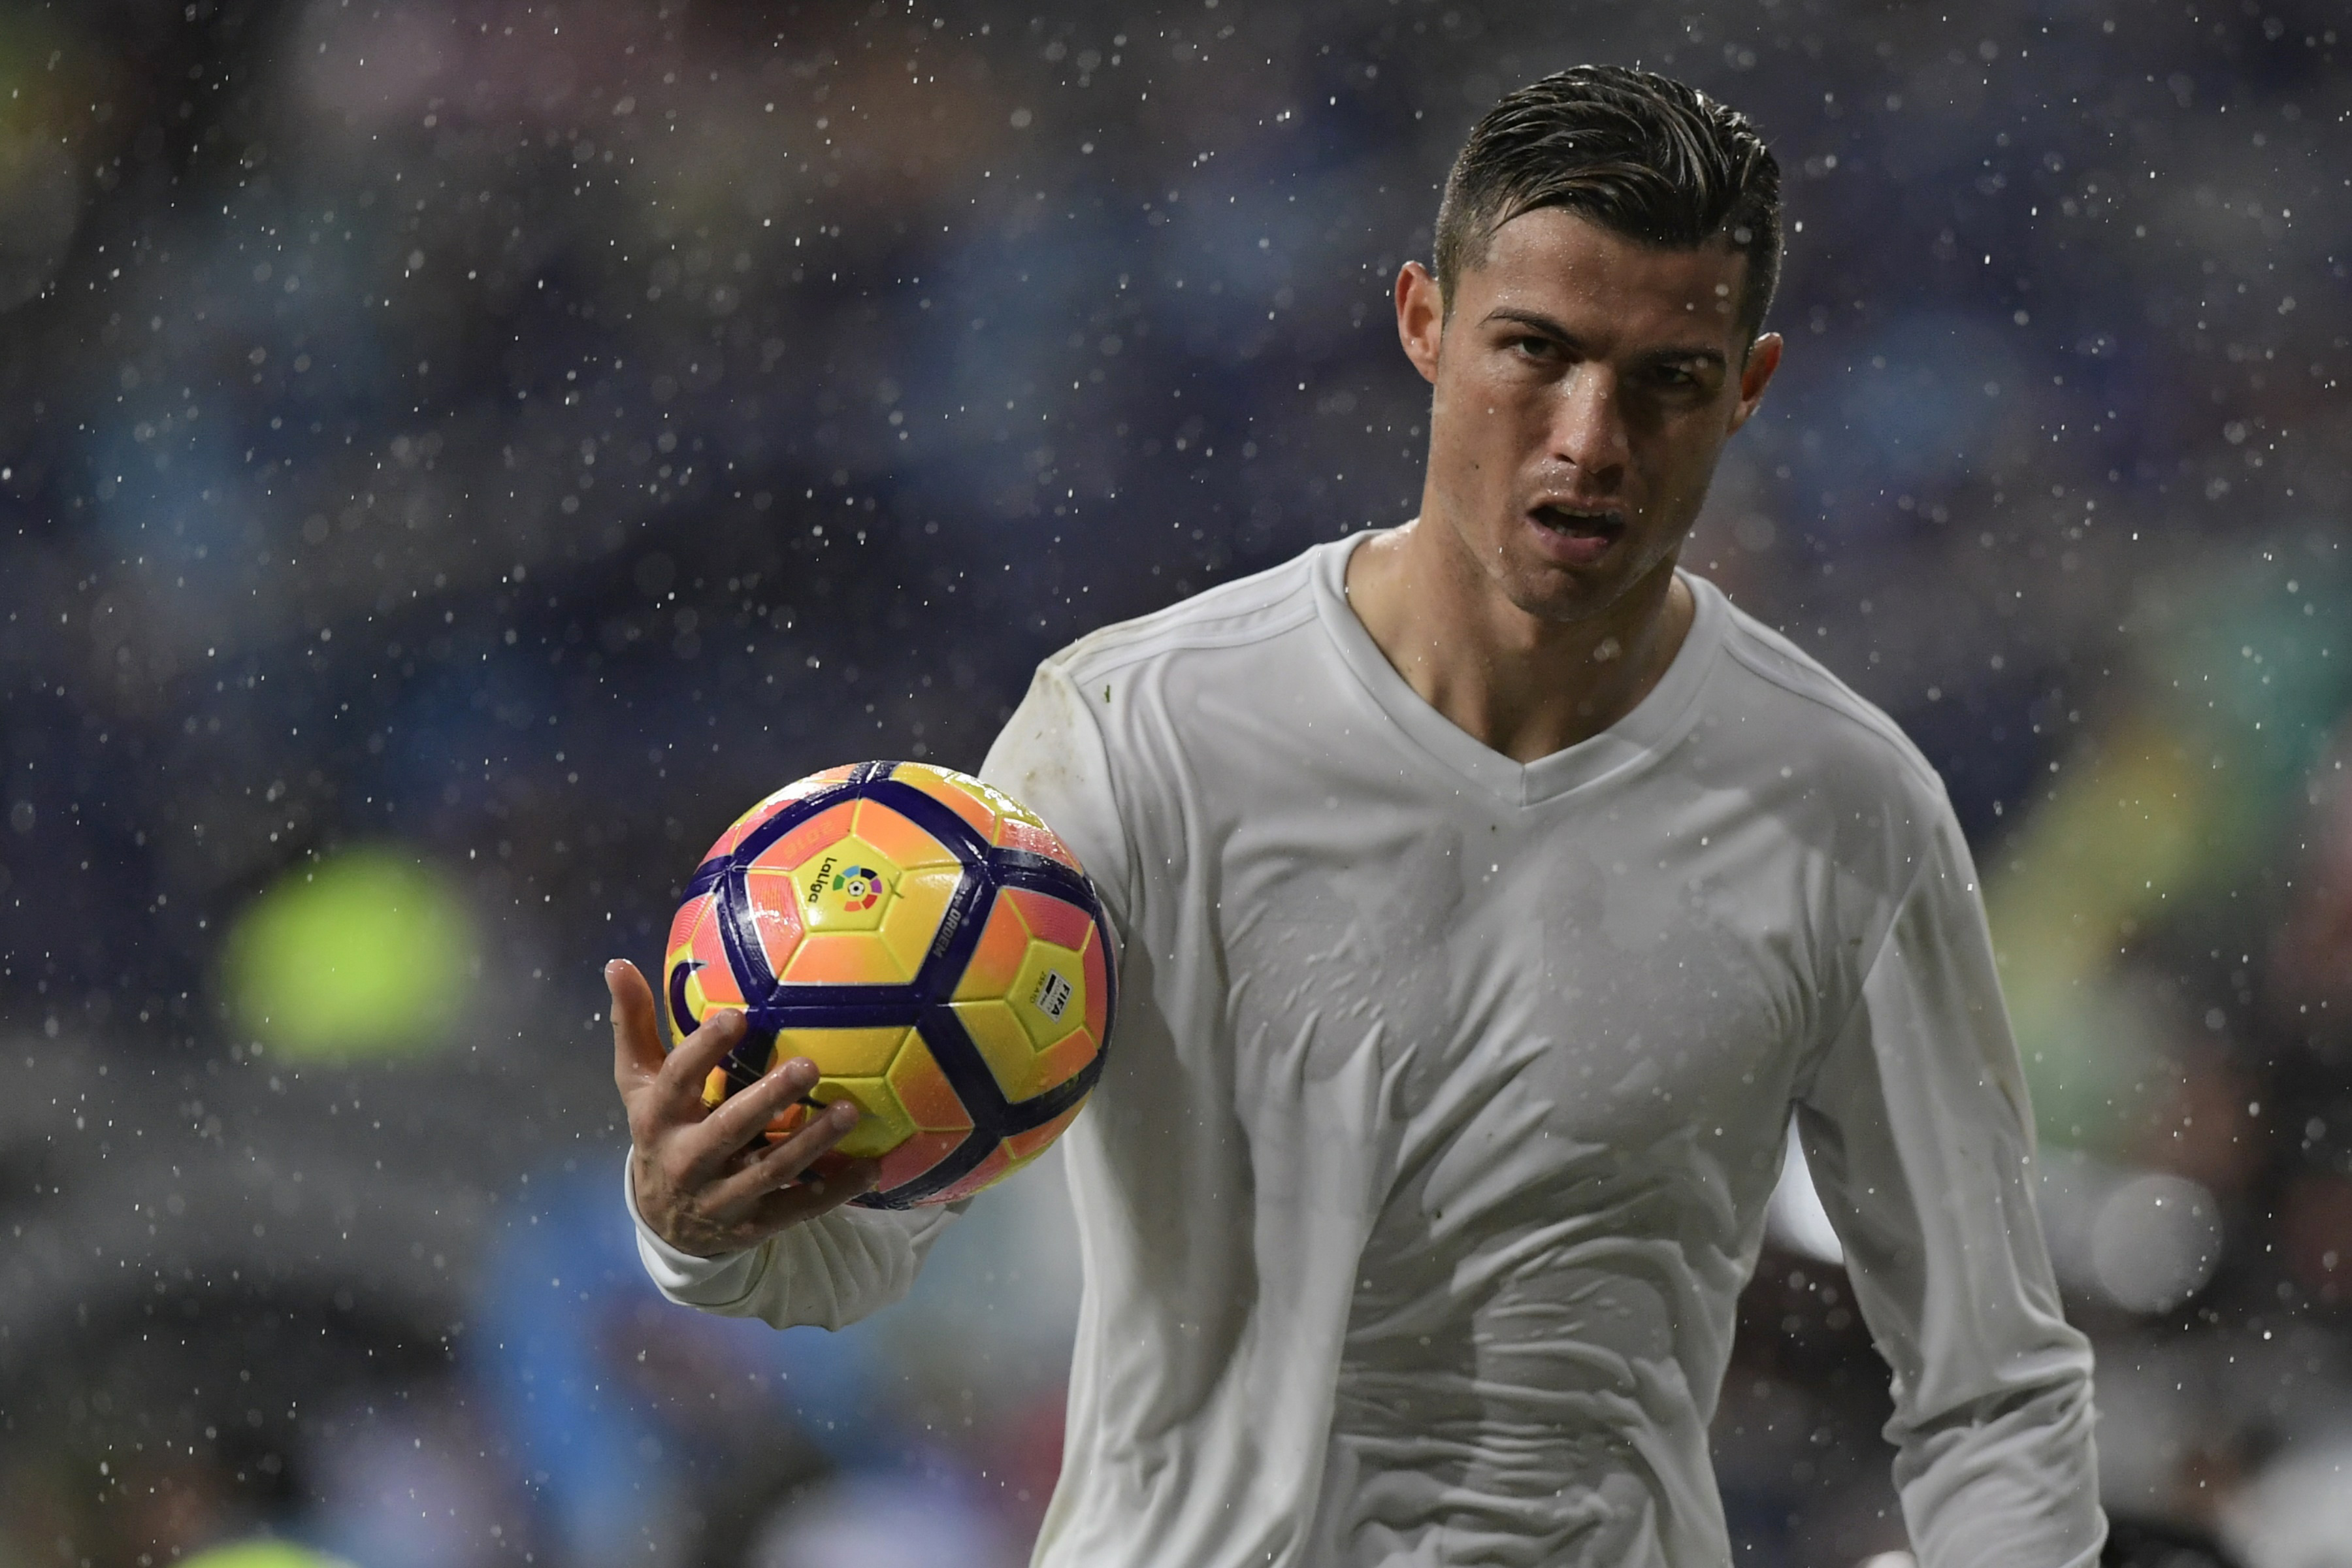 Real Madrid's Portuguese forward Cristiano Ronaldo holds a ball during the Spanish league football match Real Madrid CF vs Sporting de Gijon SAD at the Santiago Bernabeu stadium in Madrid on November 26, 2016. / AFP / JAVIER SORIANO        (Photo credit should read JAVIER SORIANO/AFP/Getty Images)